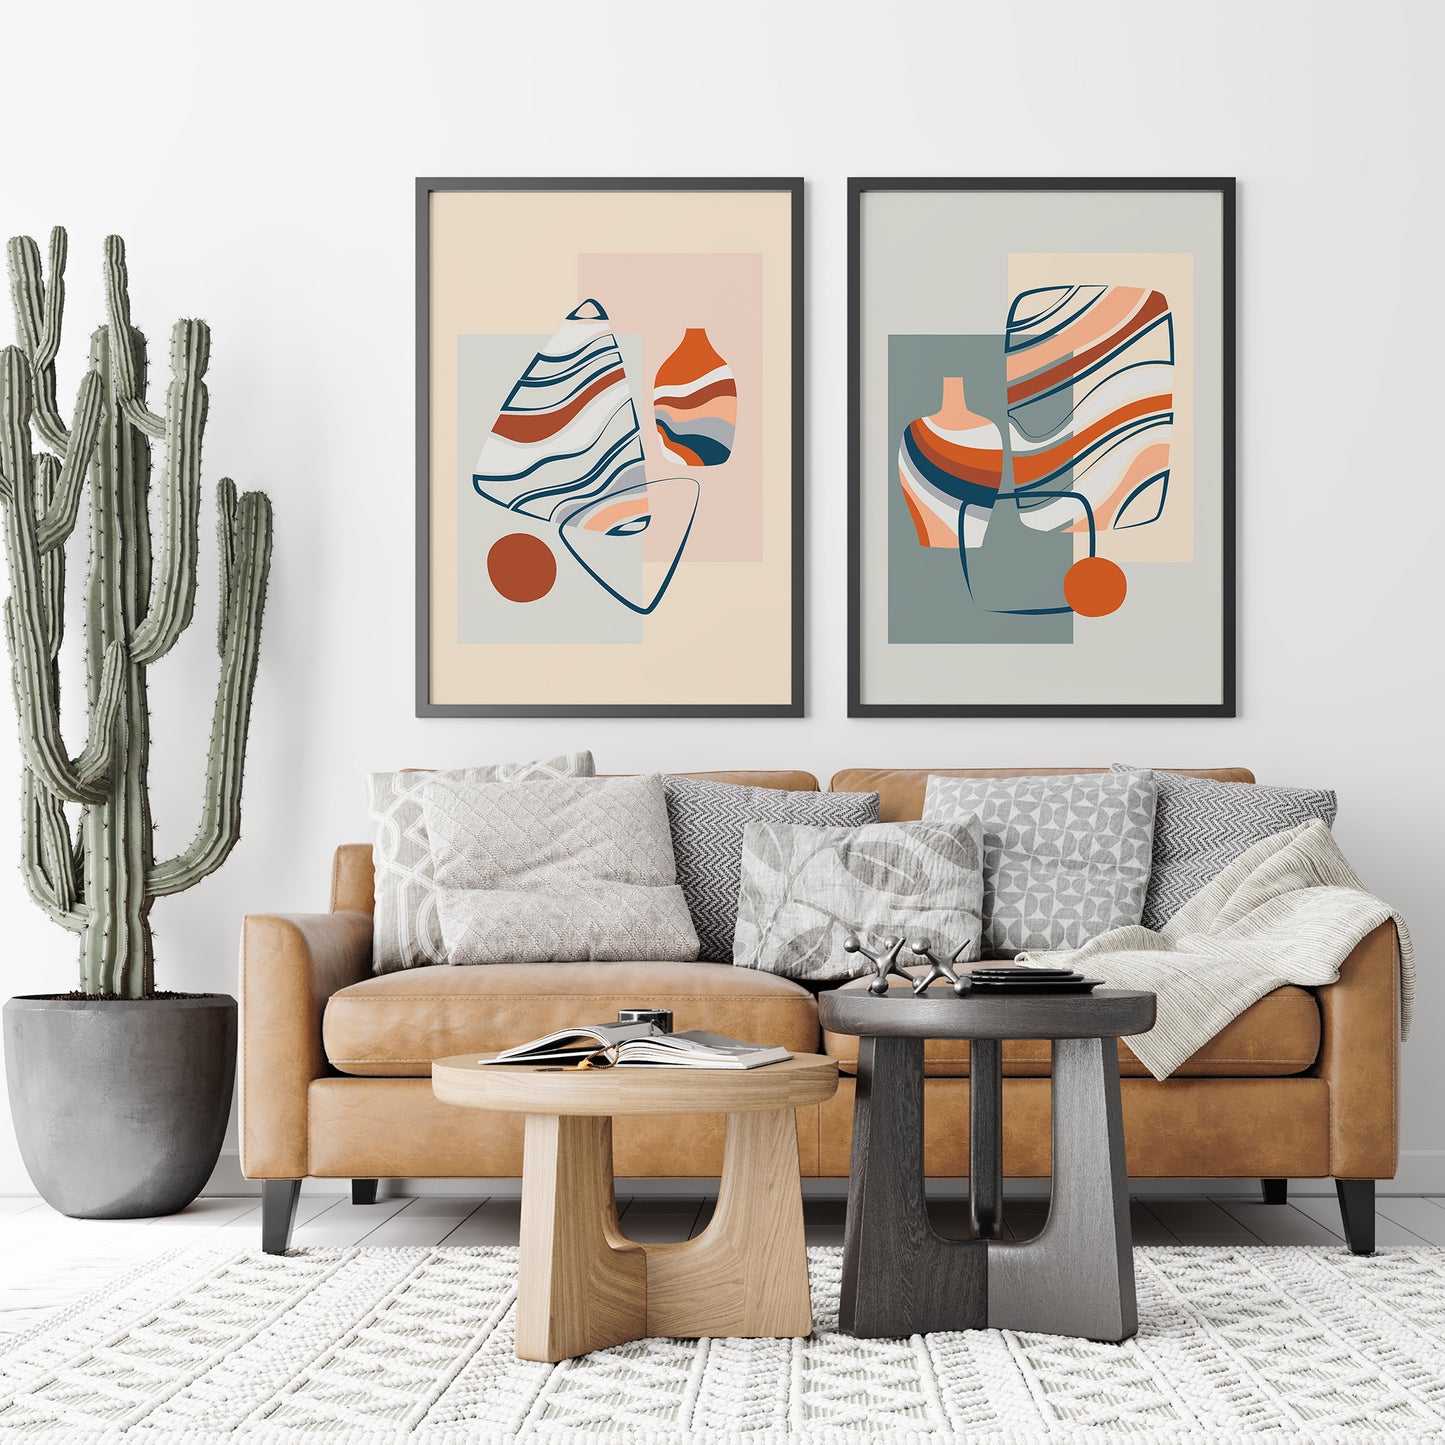 Set of 2 Bohemian Cubism Posters